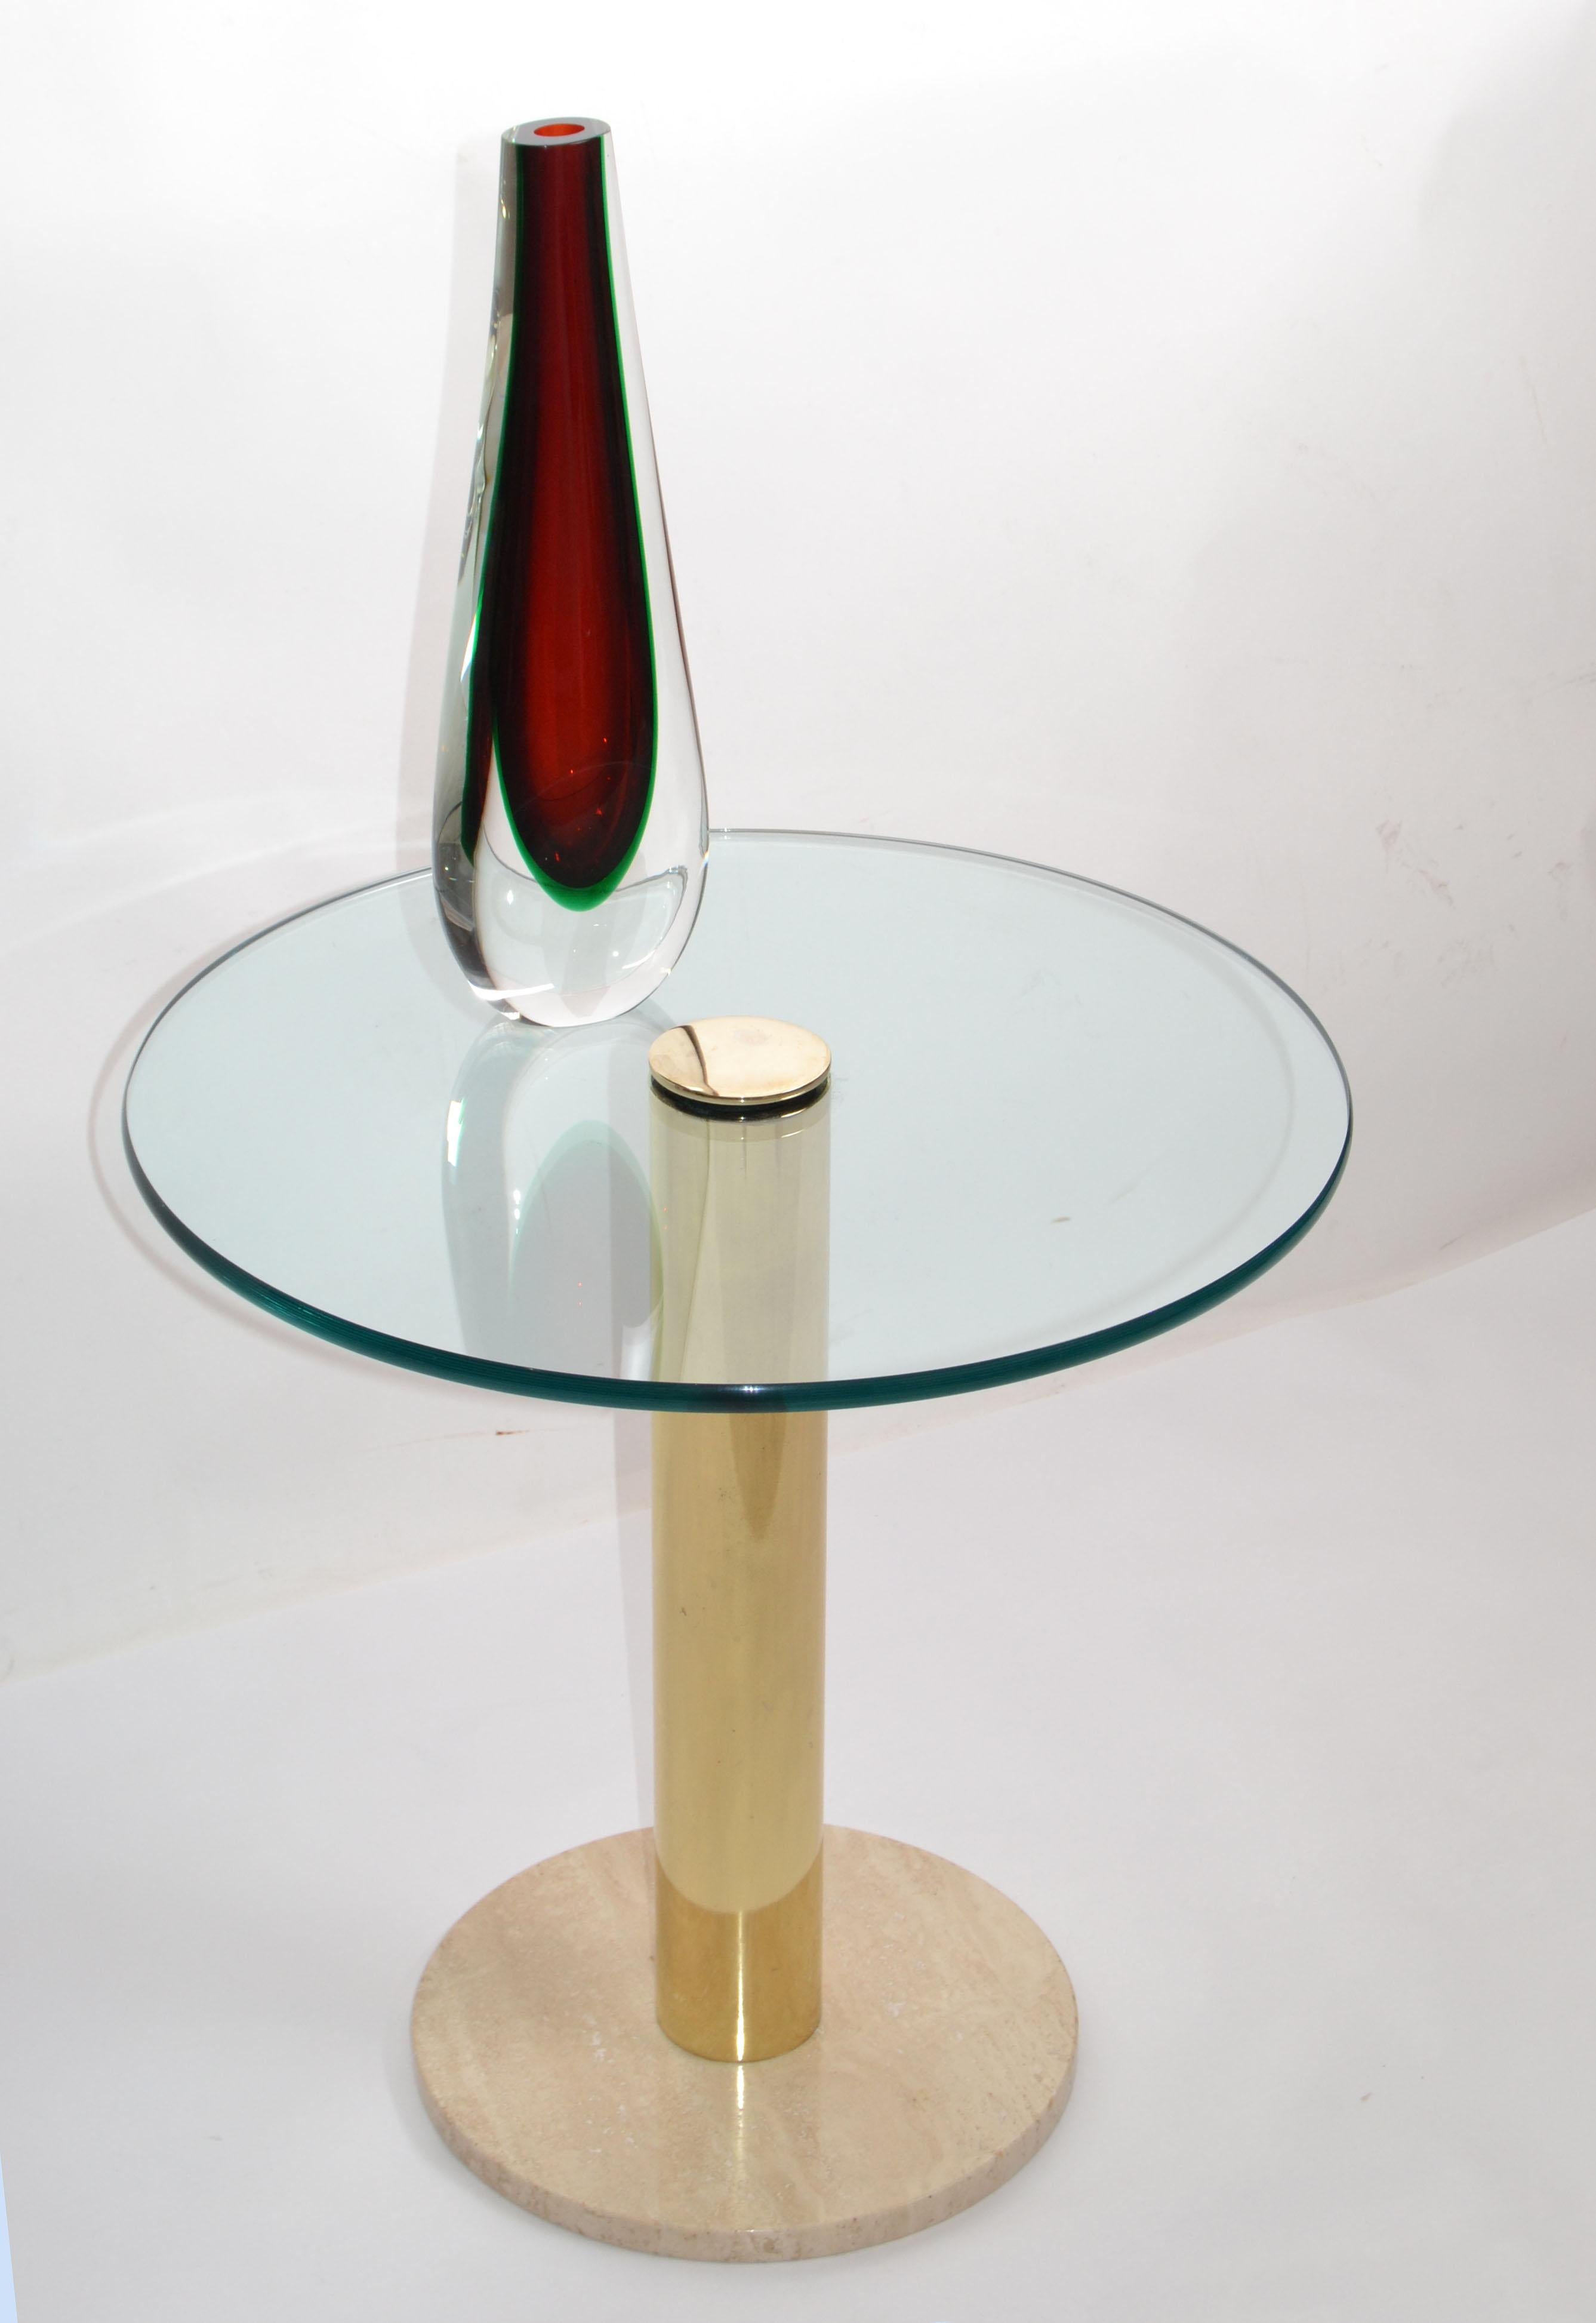 Original Flavio Poli Sommerso Glass Murano Seguso Vase encased with 3 different colors, dark red, green and transparent.
Made in Italy in the late 1960.
Looks stunning in any angle.
Engraved Signature at the Base, Flavio Poli Murano.
Some light